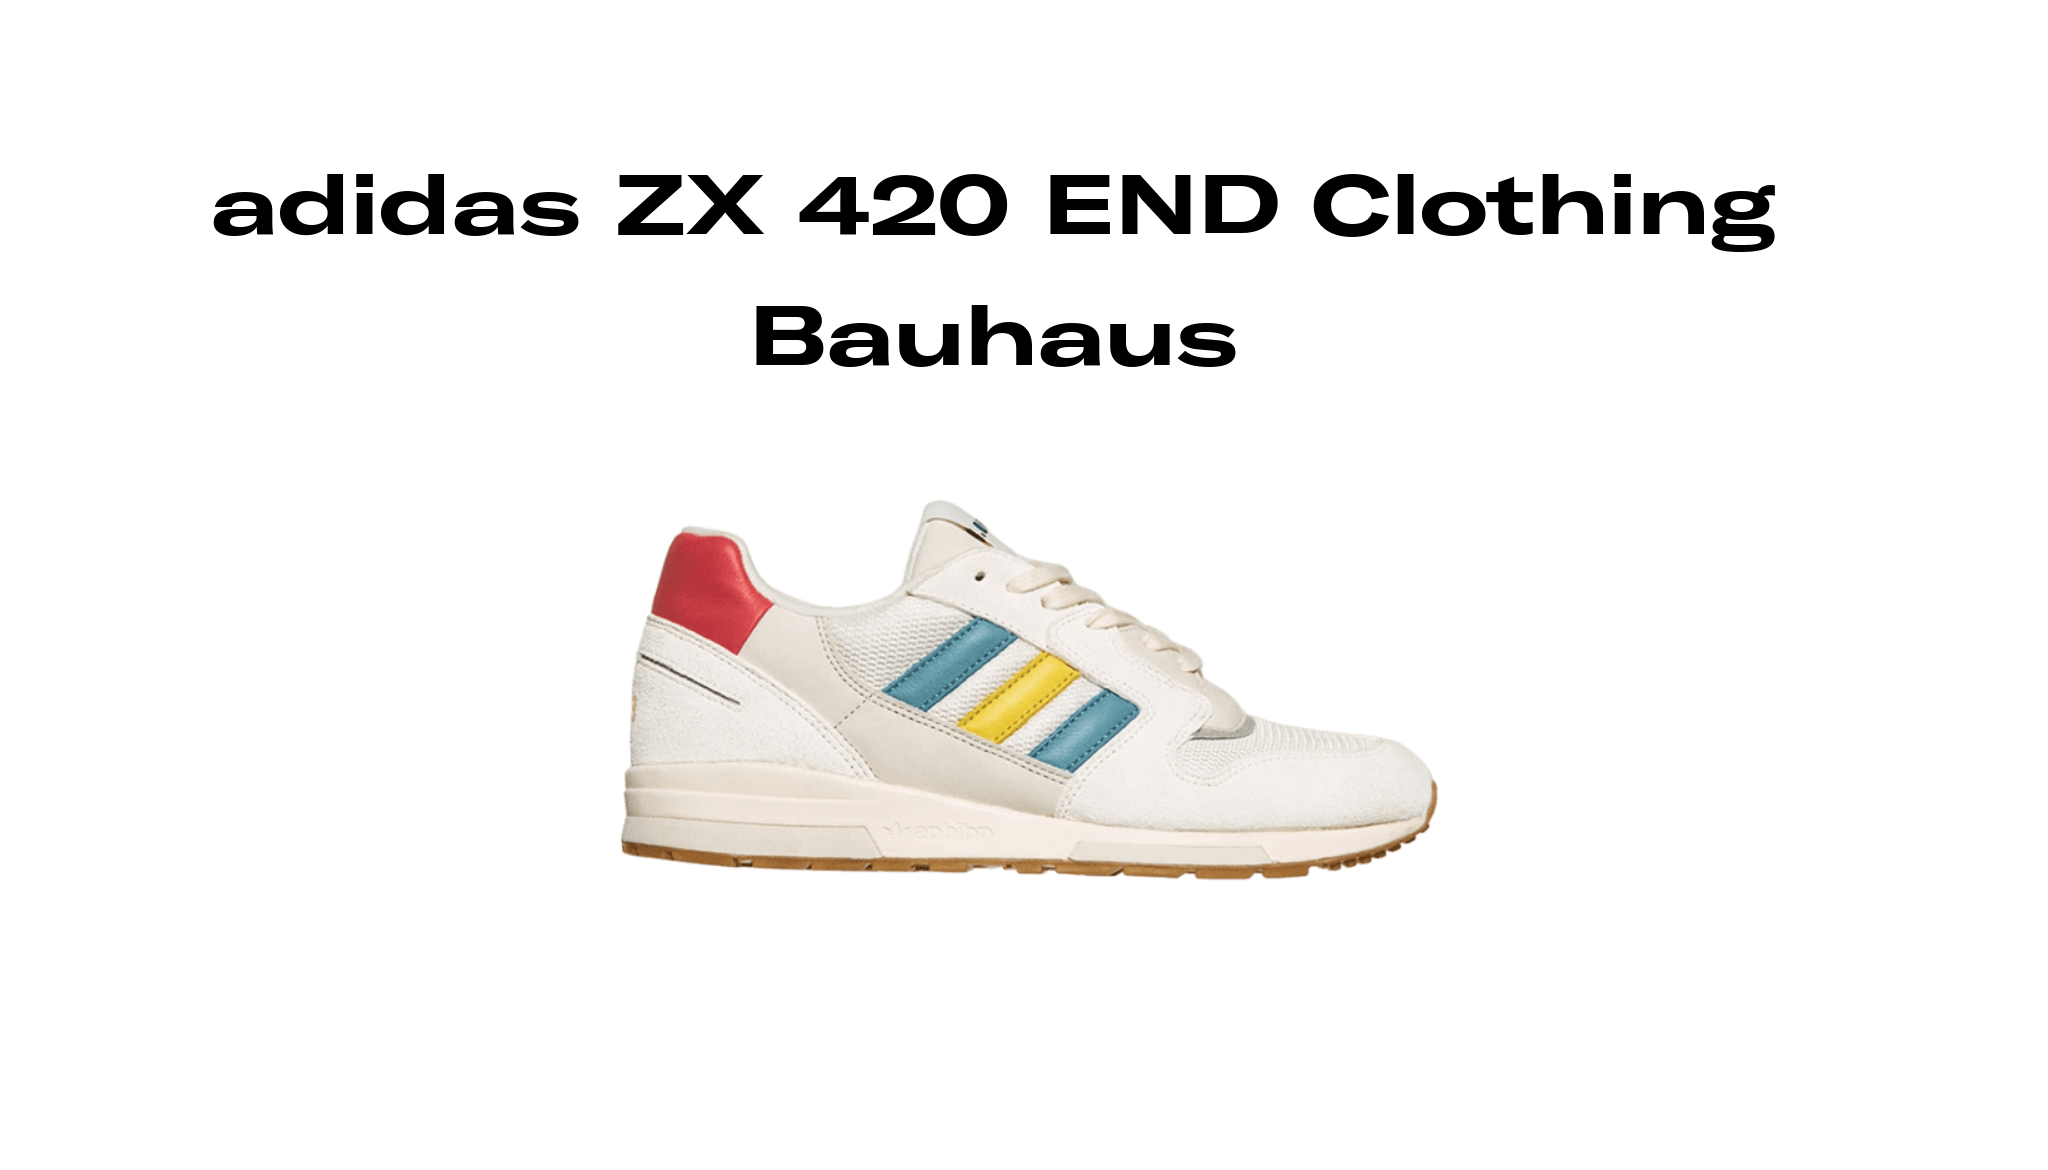 adidas ZX 420 END Clothing Bauhaus, Raffles and Release Date 